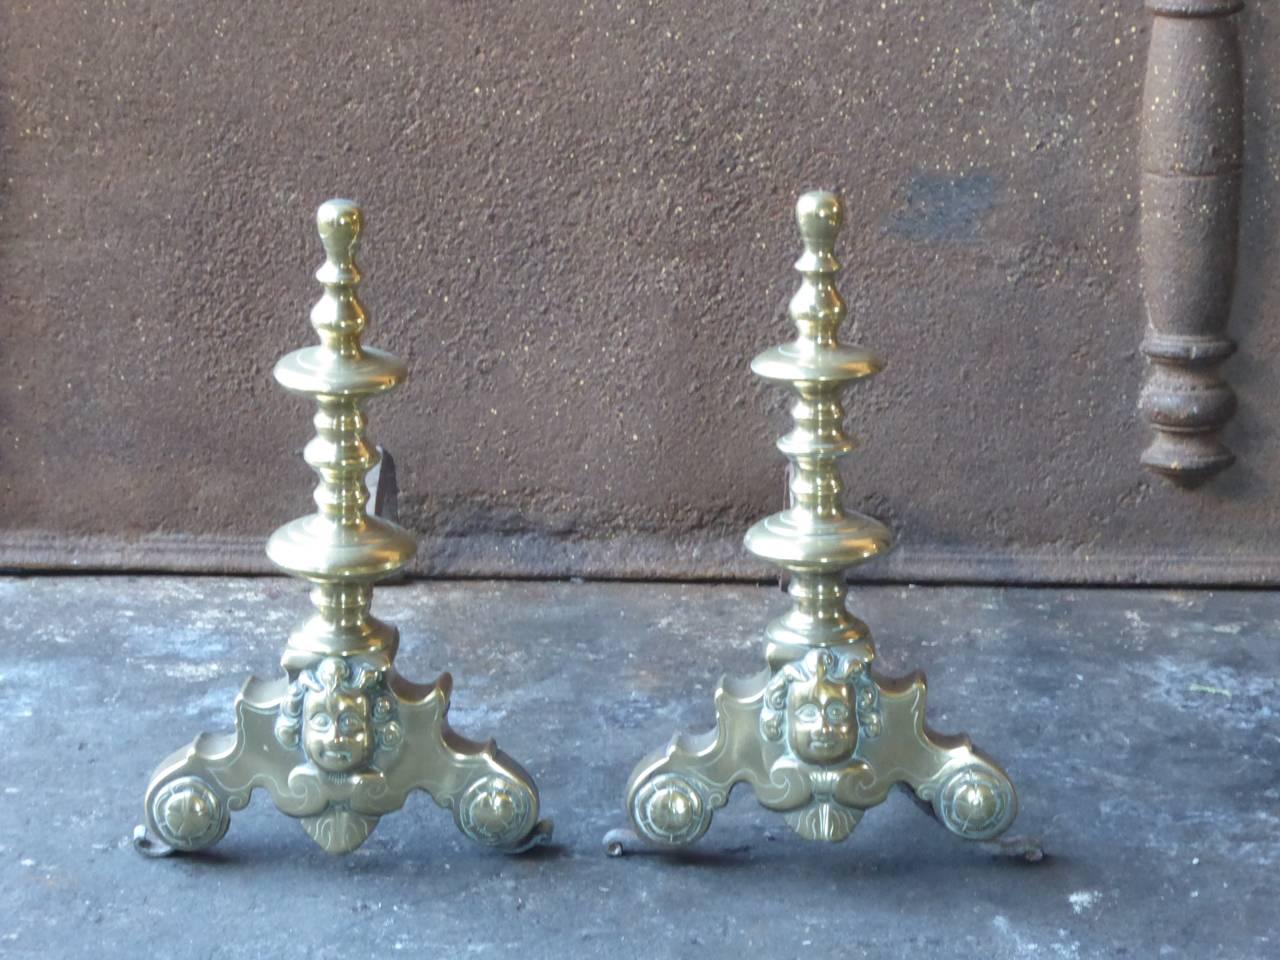 17th century French Louis XIV andirons made of wrought iron and polished brass.

We have a unique and specialized collection of antique and used fireplace accessories consisting of more than 1000 listings at 1stdibs. Amongst others, we always have